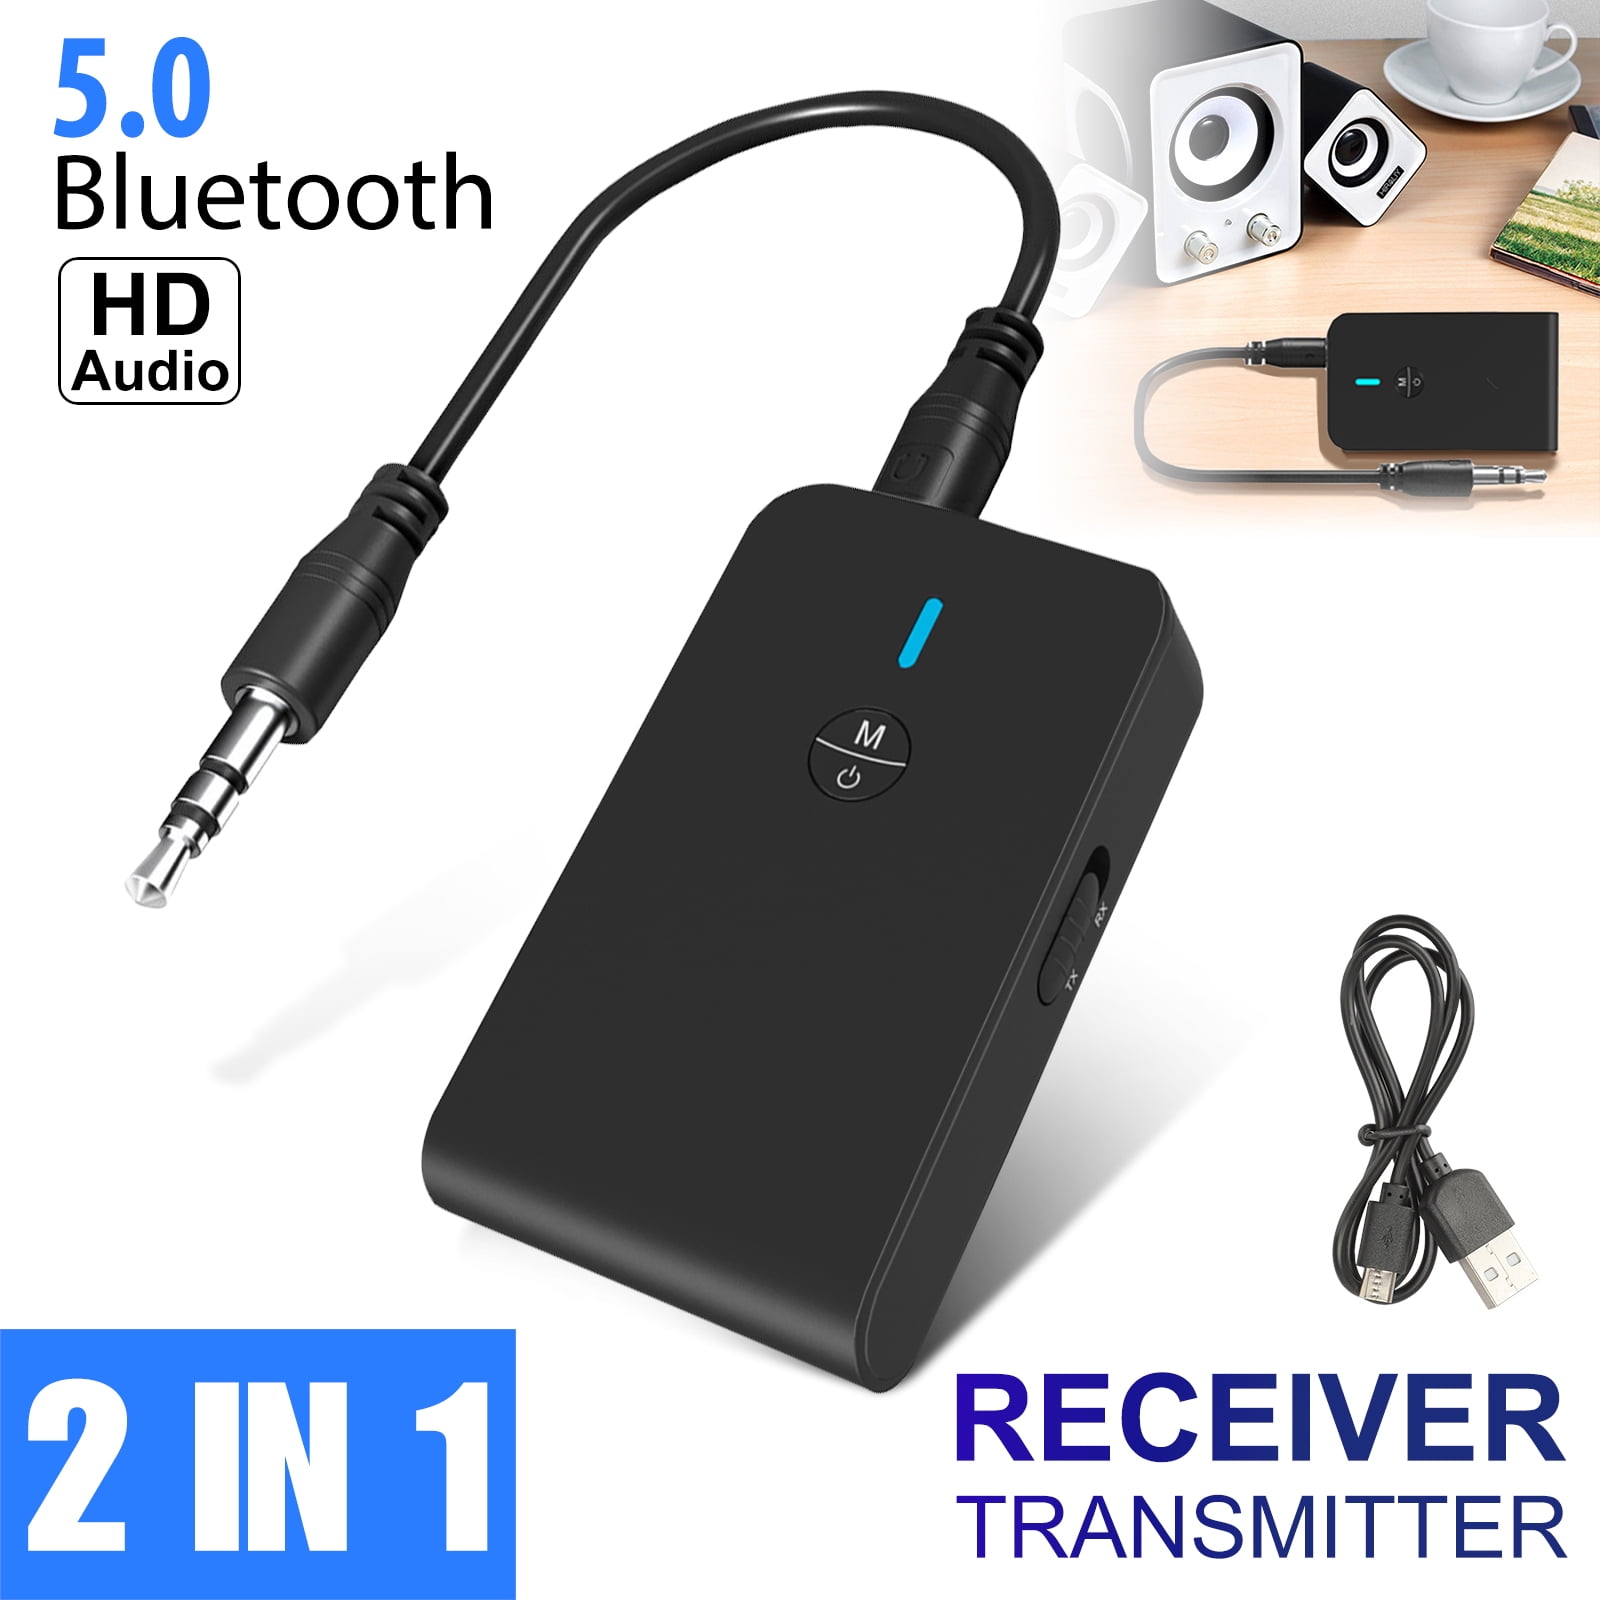 Bluetooth Transmitter Receiver Wireless Adapter: 3.5mm Aux Jack Stereo  Audio Input Output - for TV Car Headphone Speakers iPhone PC : Electronics  